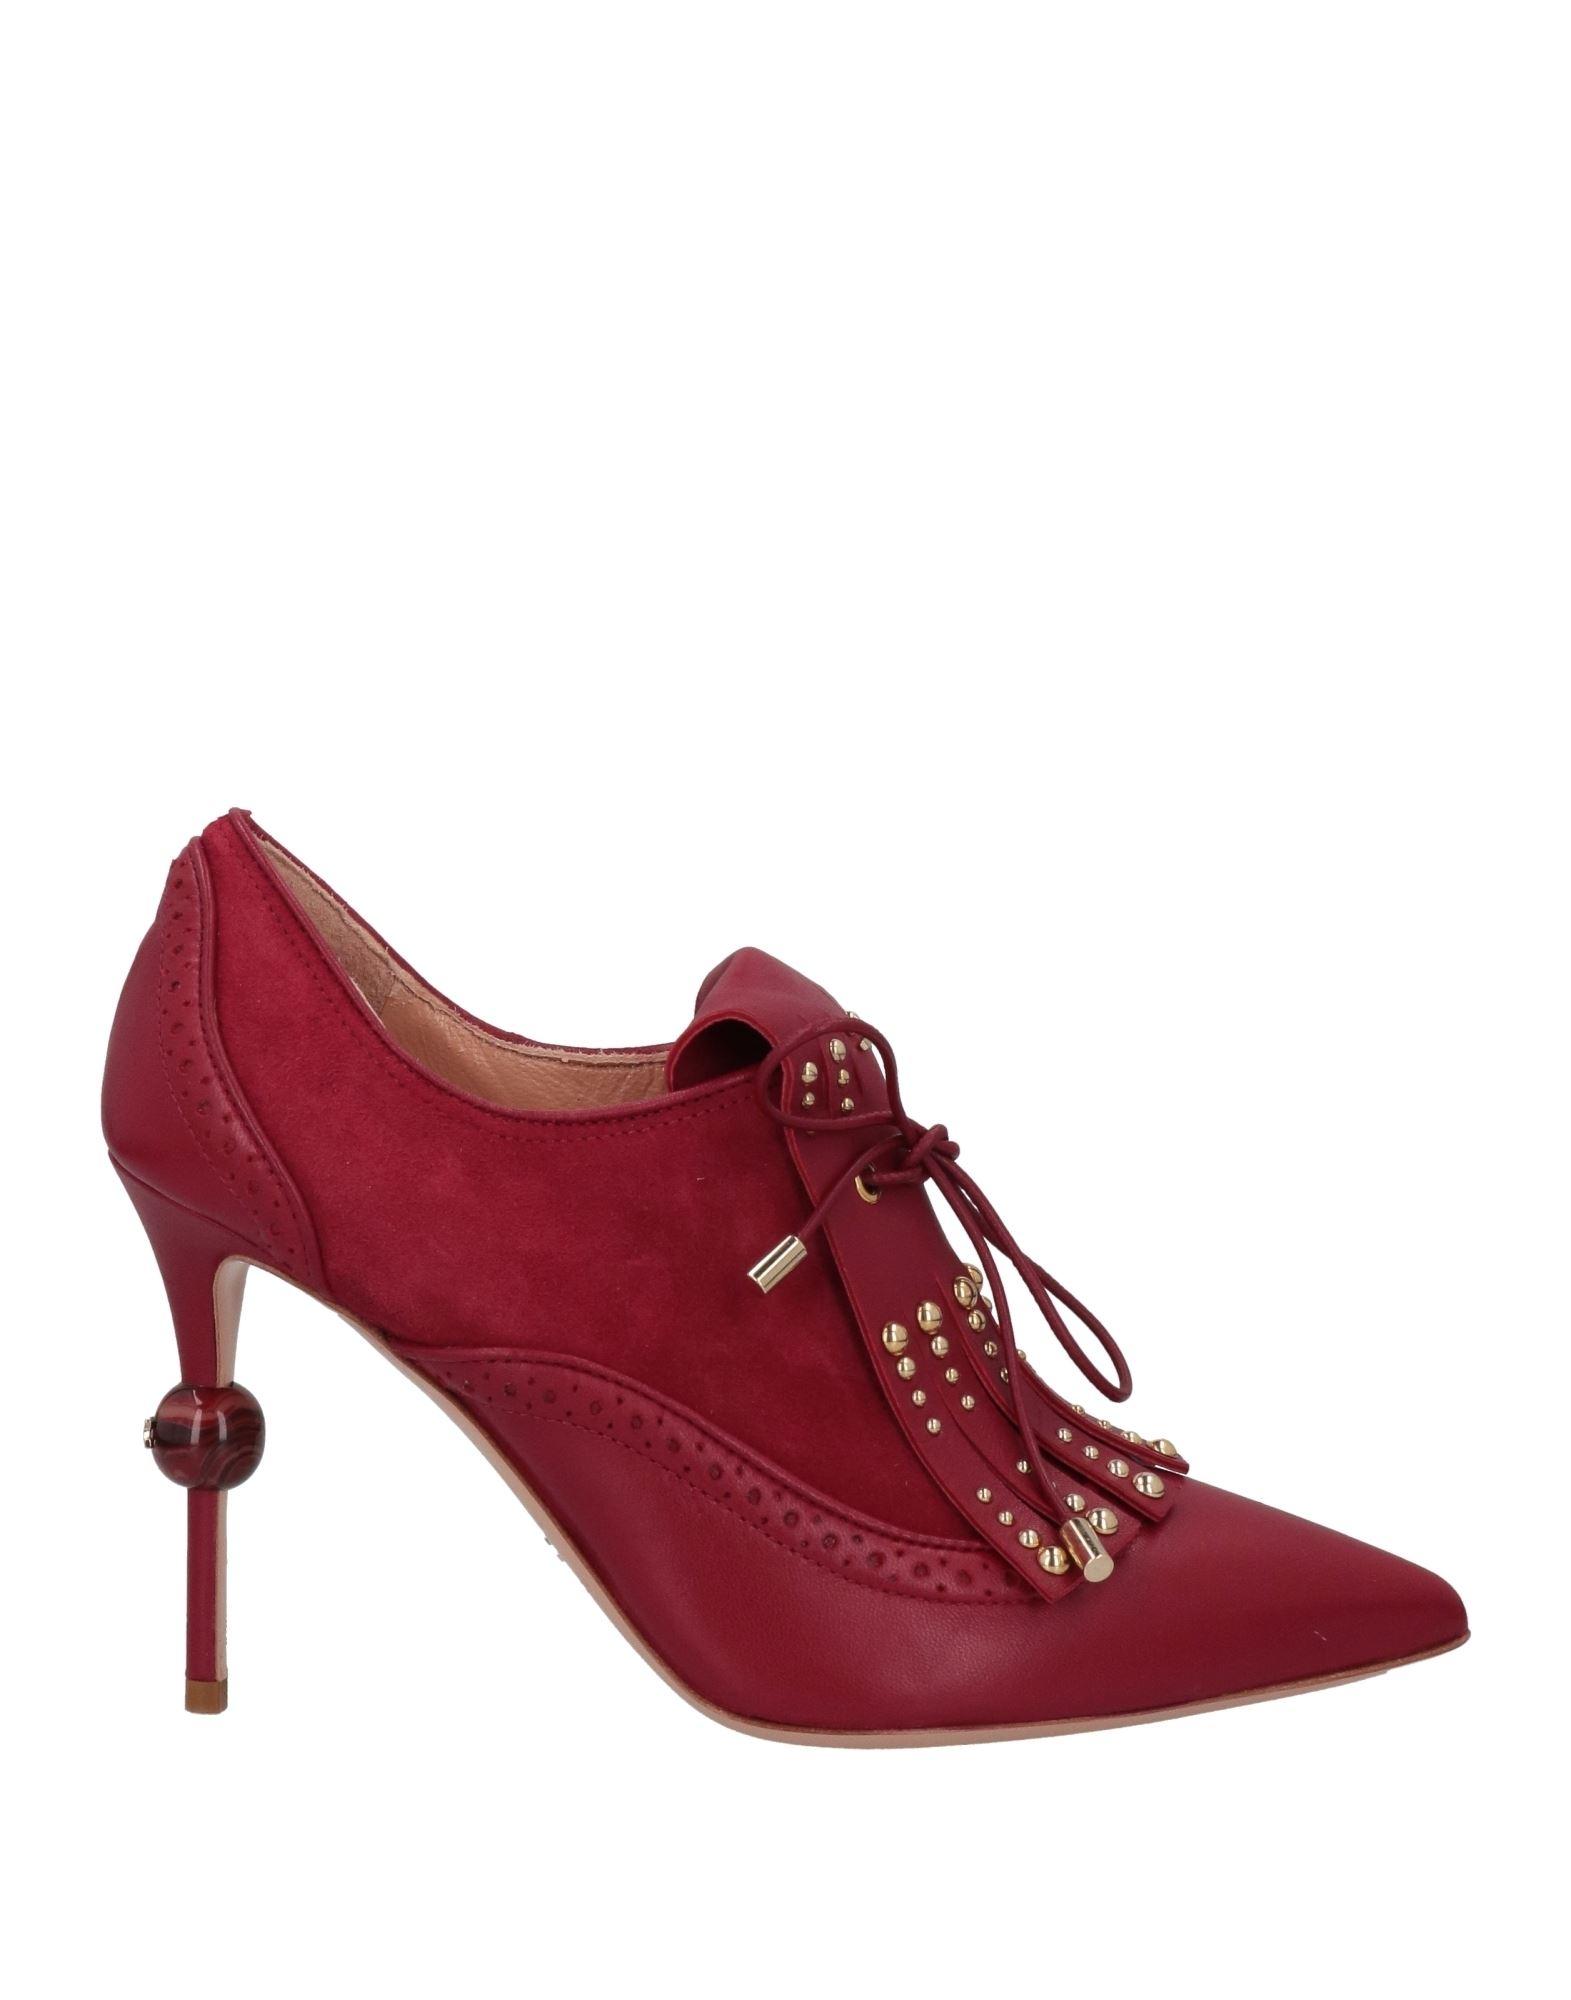 Elisabetta Franchi Lace-up Shoes in Red | Lyst